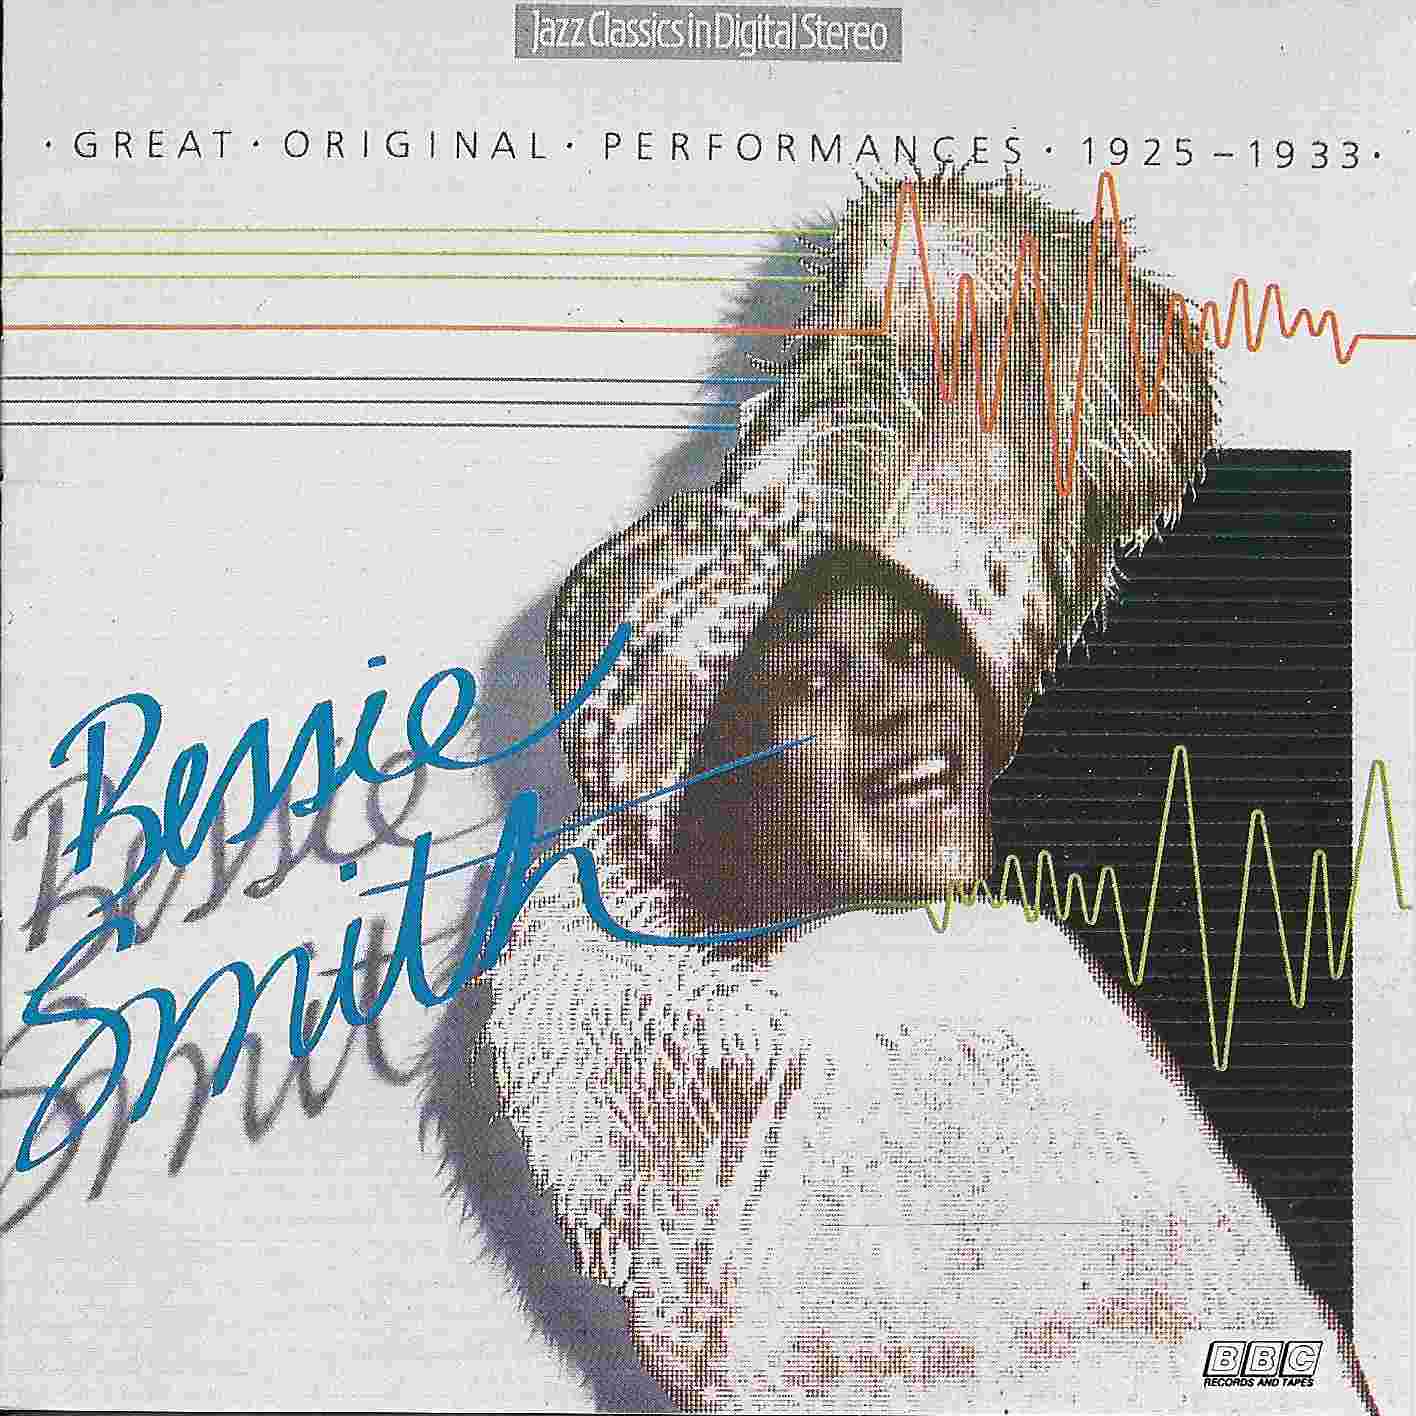 Picture of Jazz Classics - Bessie Smith by artist Bessie Smith from the BBC cds - Records and Tapes library